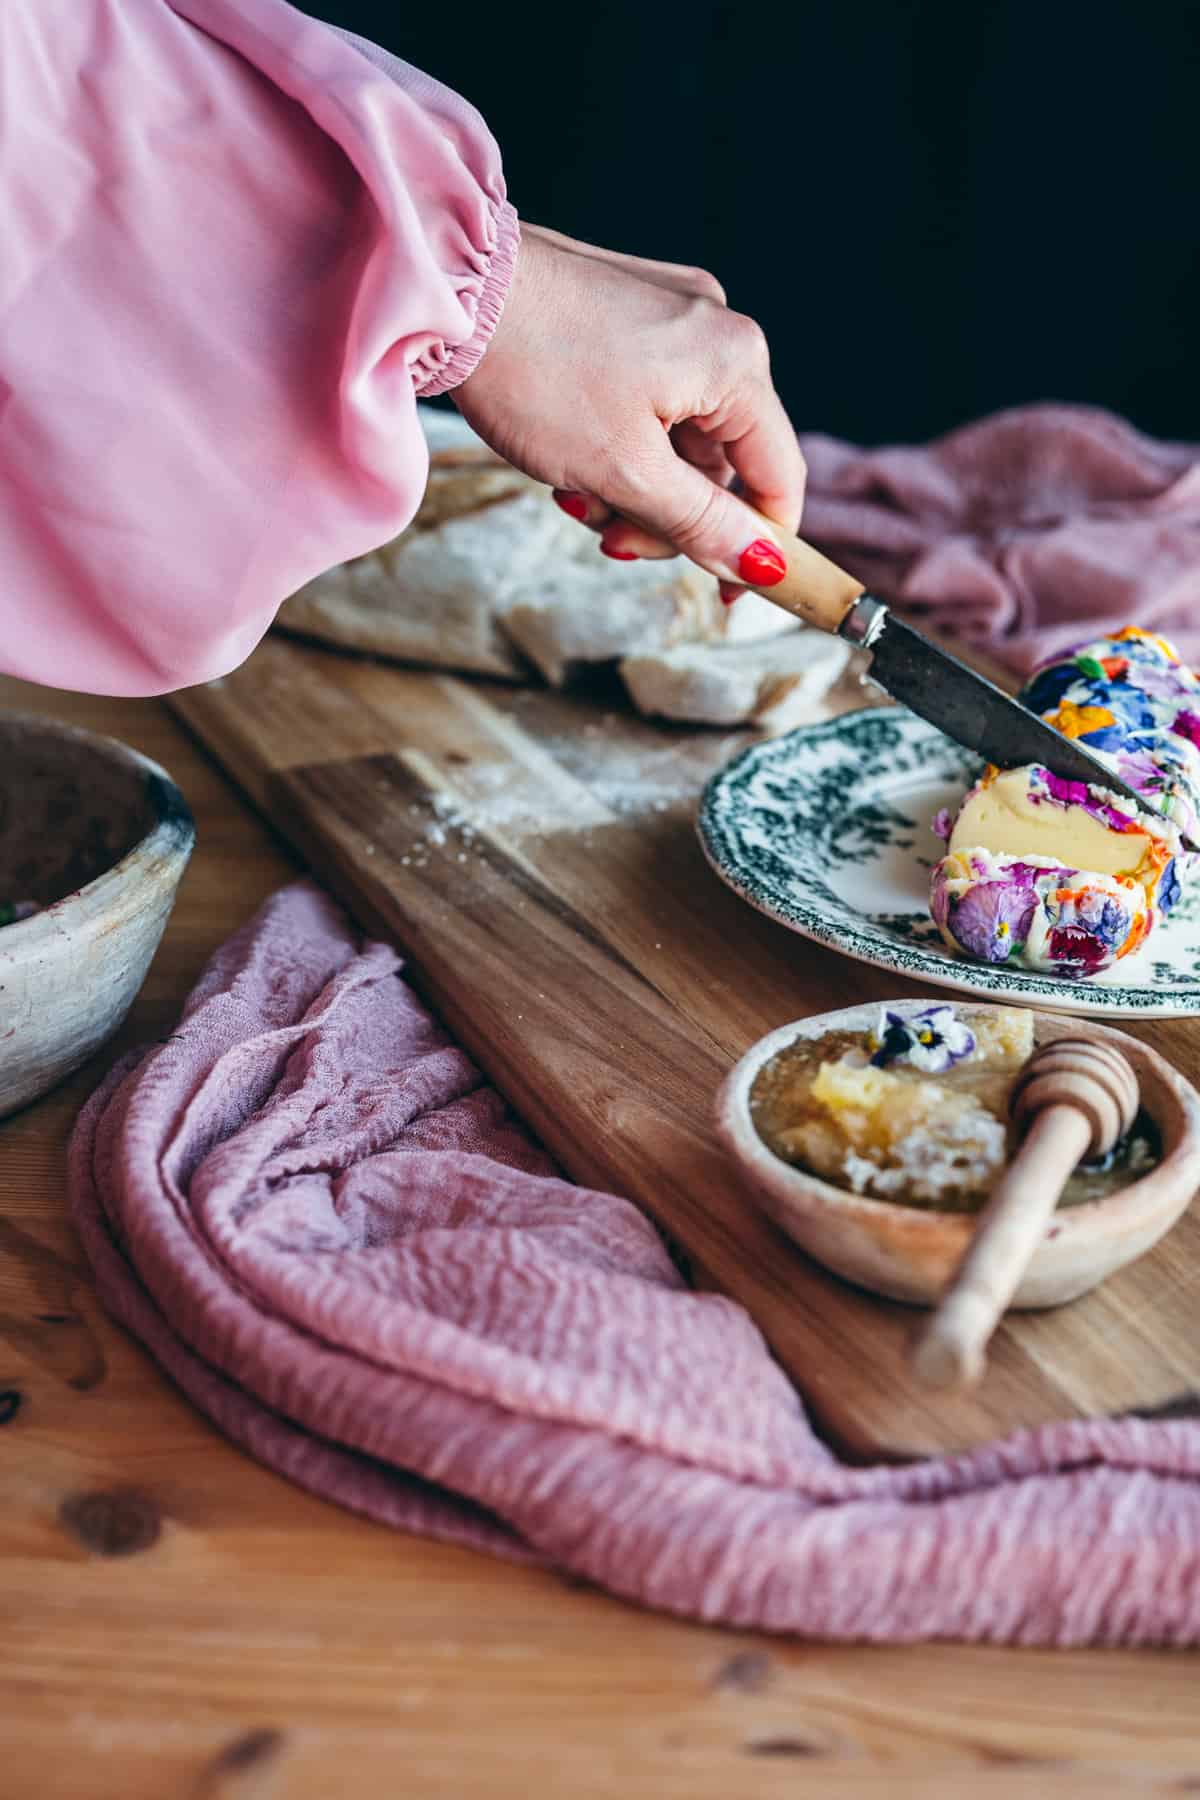 Woman's hand showing pink flowing sleeves and bright red finger nails holding a vintage knife cutting into flower compound butter, next to a loaf of bread and a small dish of honey with honey comb stick